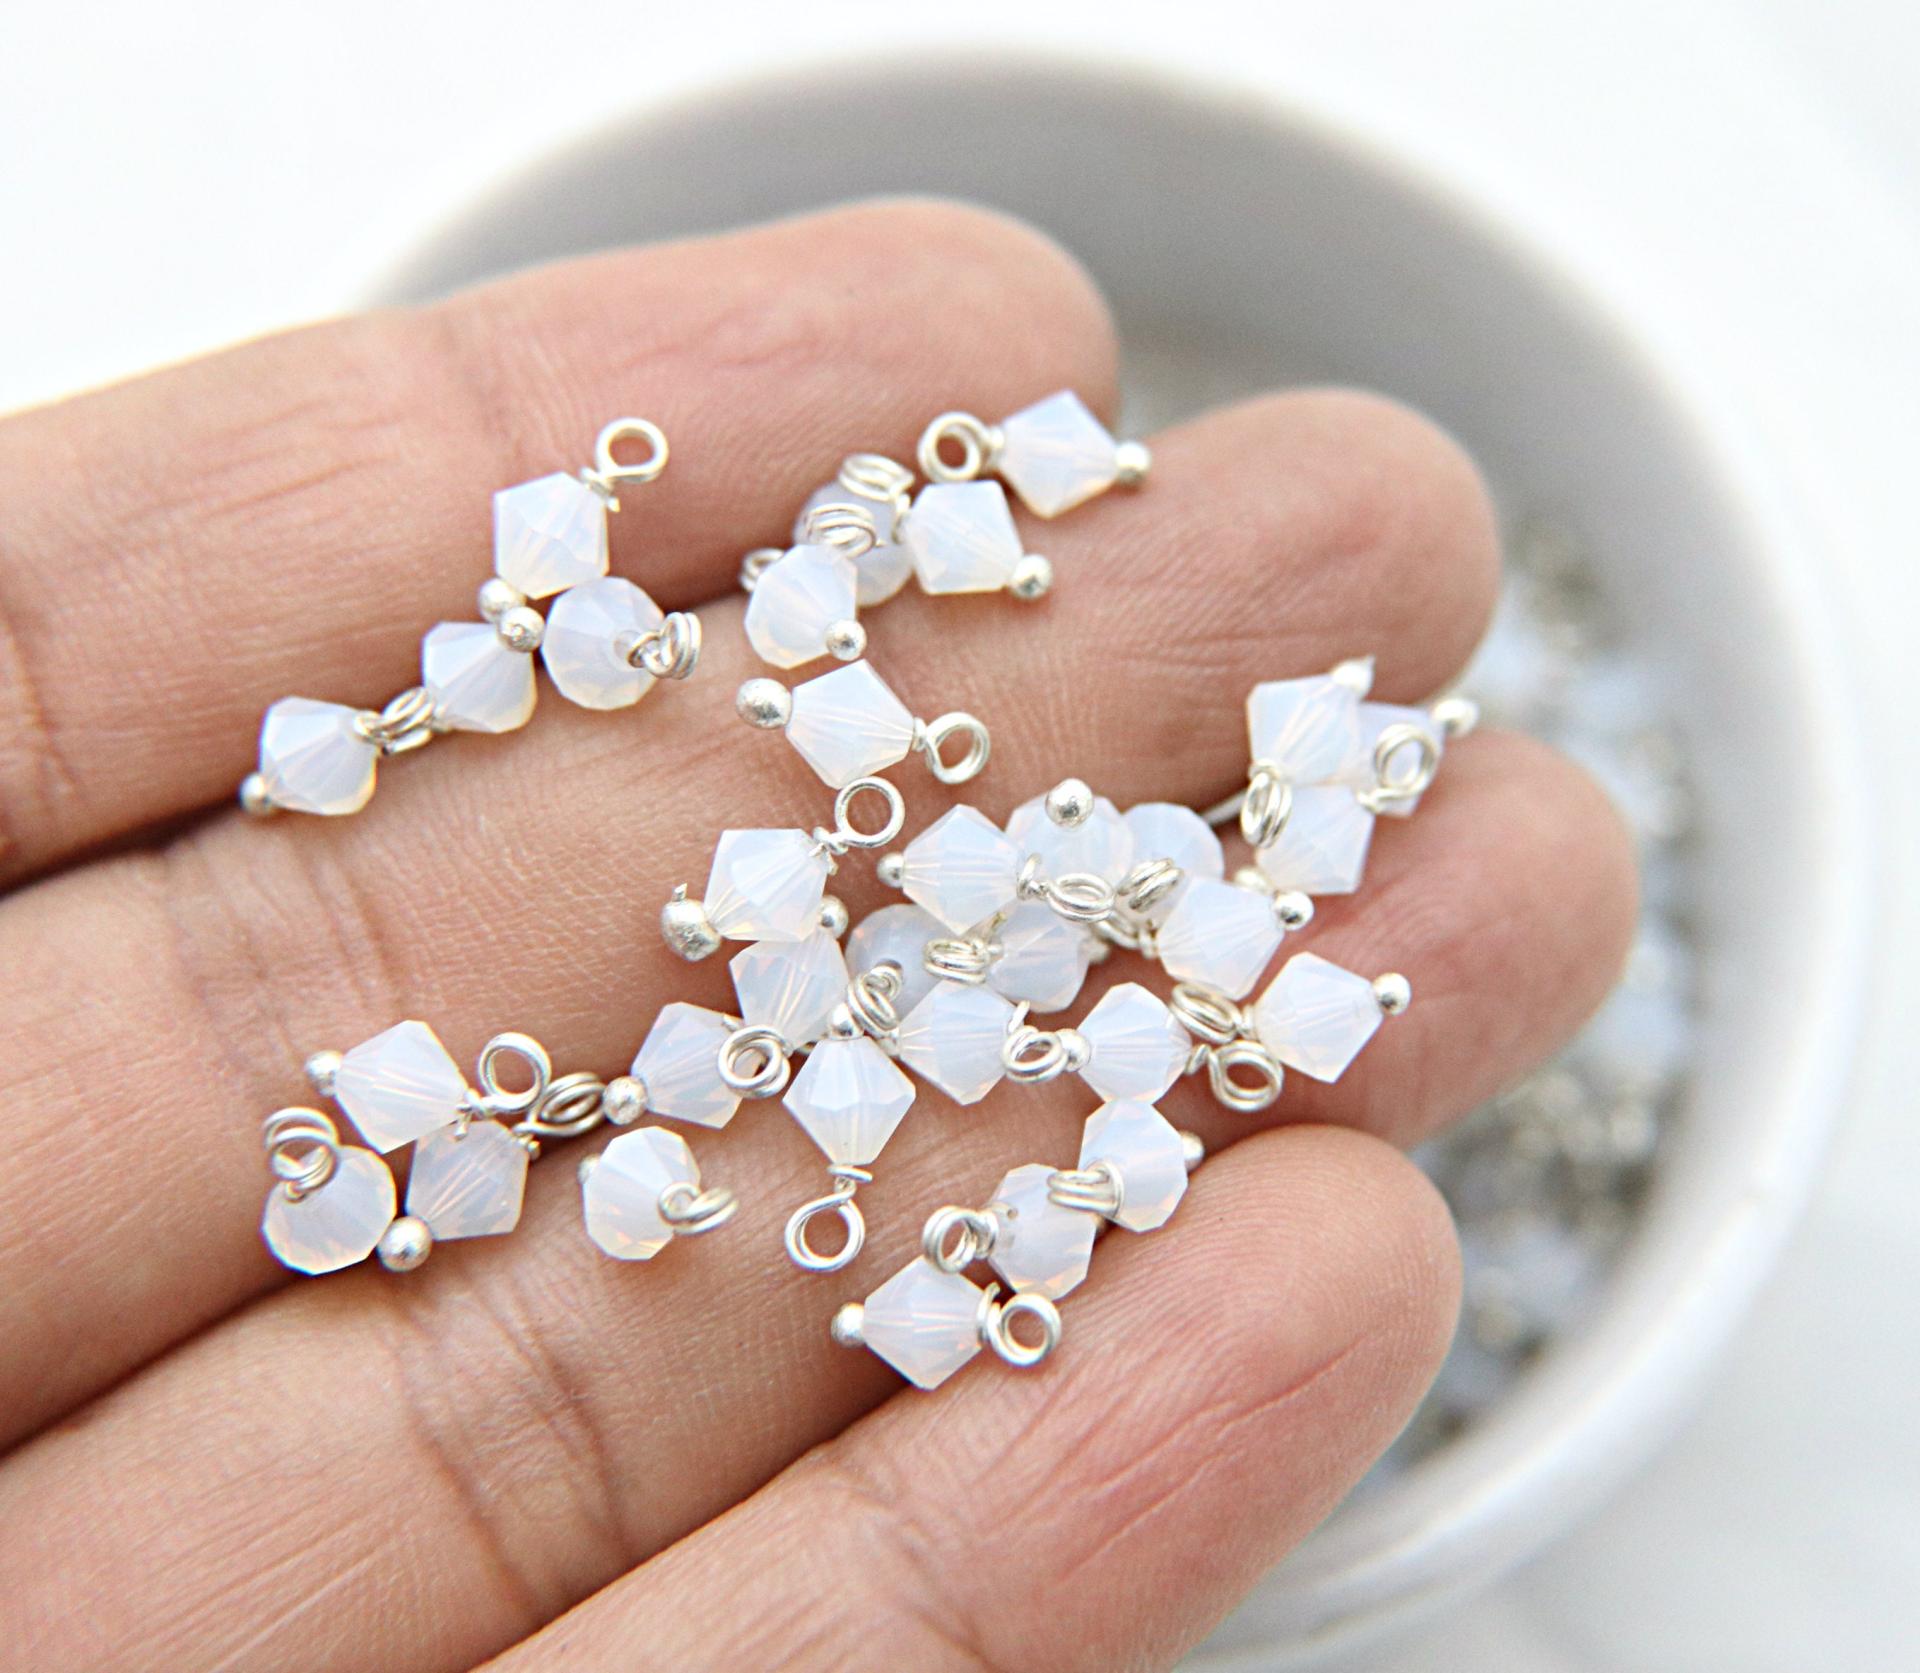 5mm Swarovski White Opal Crystal Dangles in Sterling Silver Wire Wrapped- Charms- Drops- Jewelry Making 24/72/144/432/1000Pieces